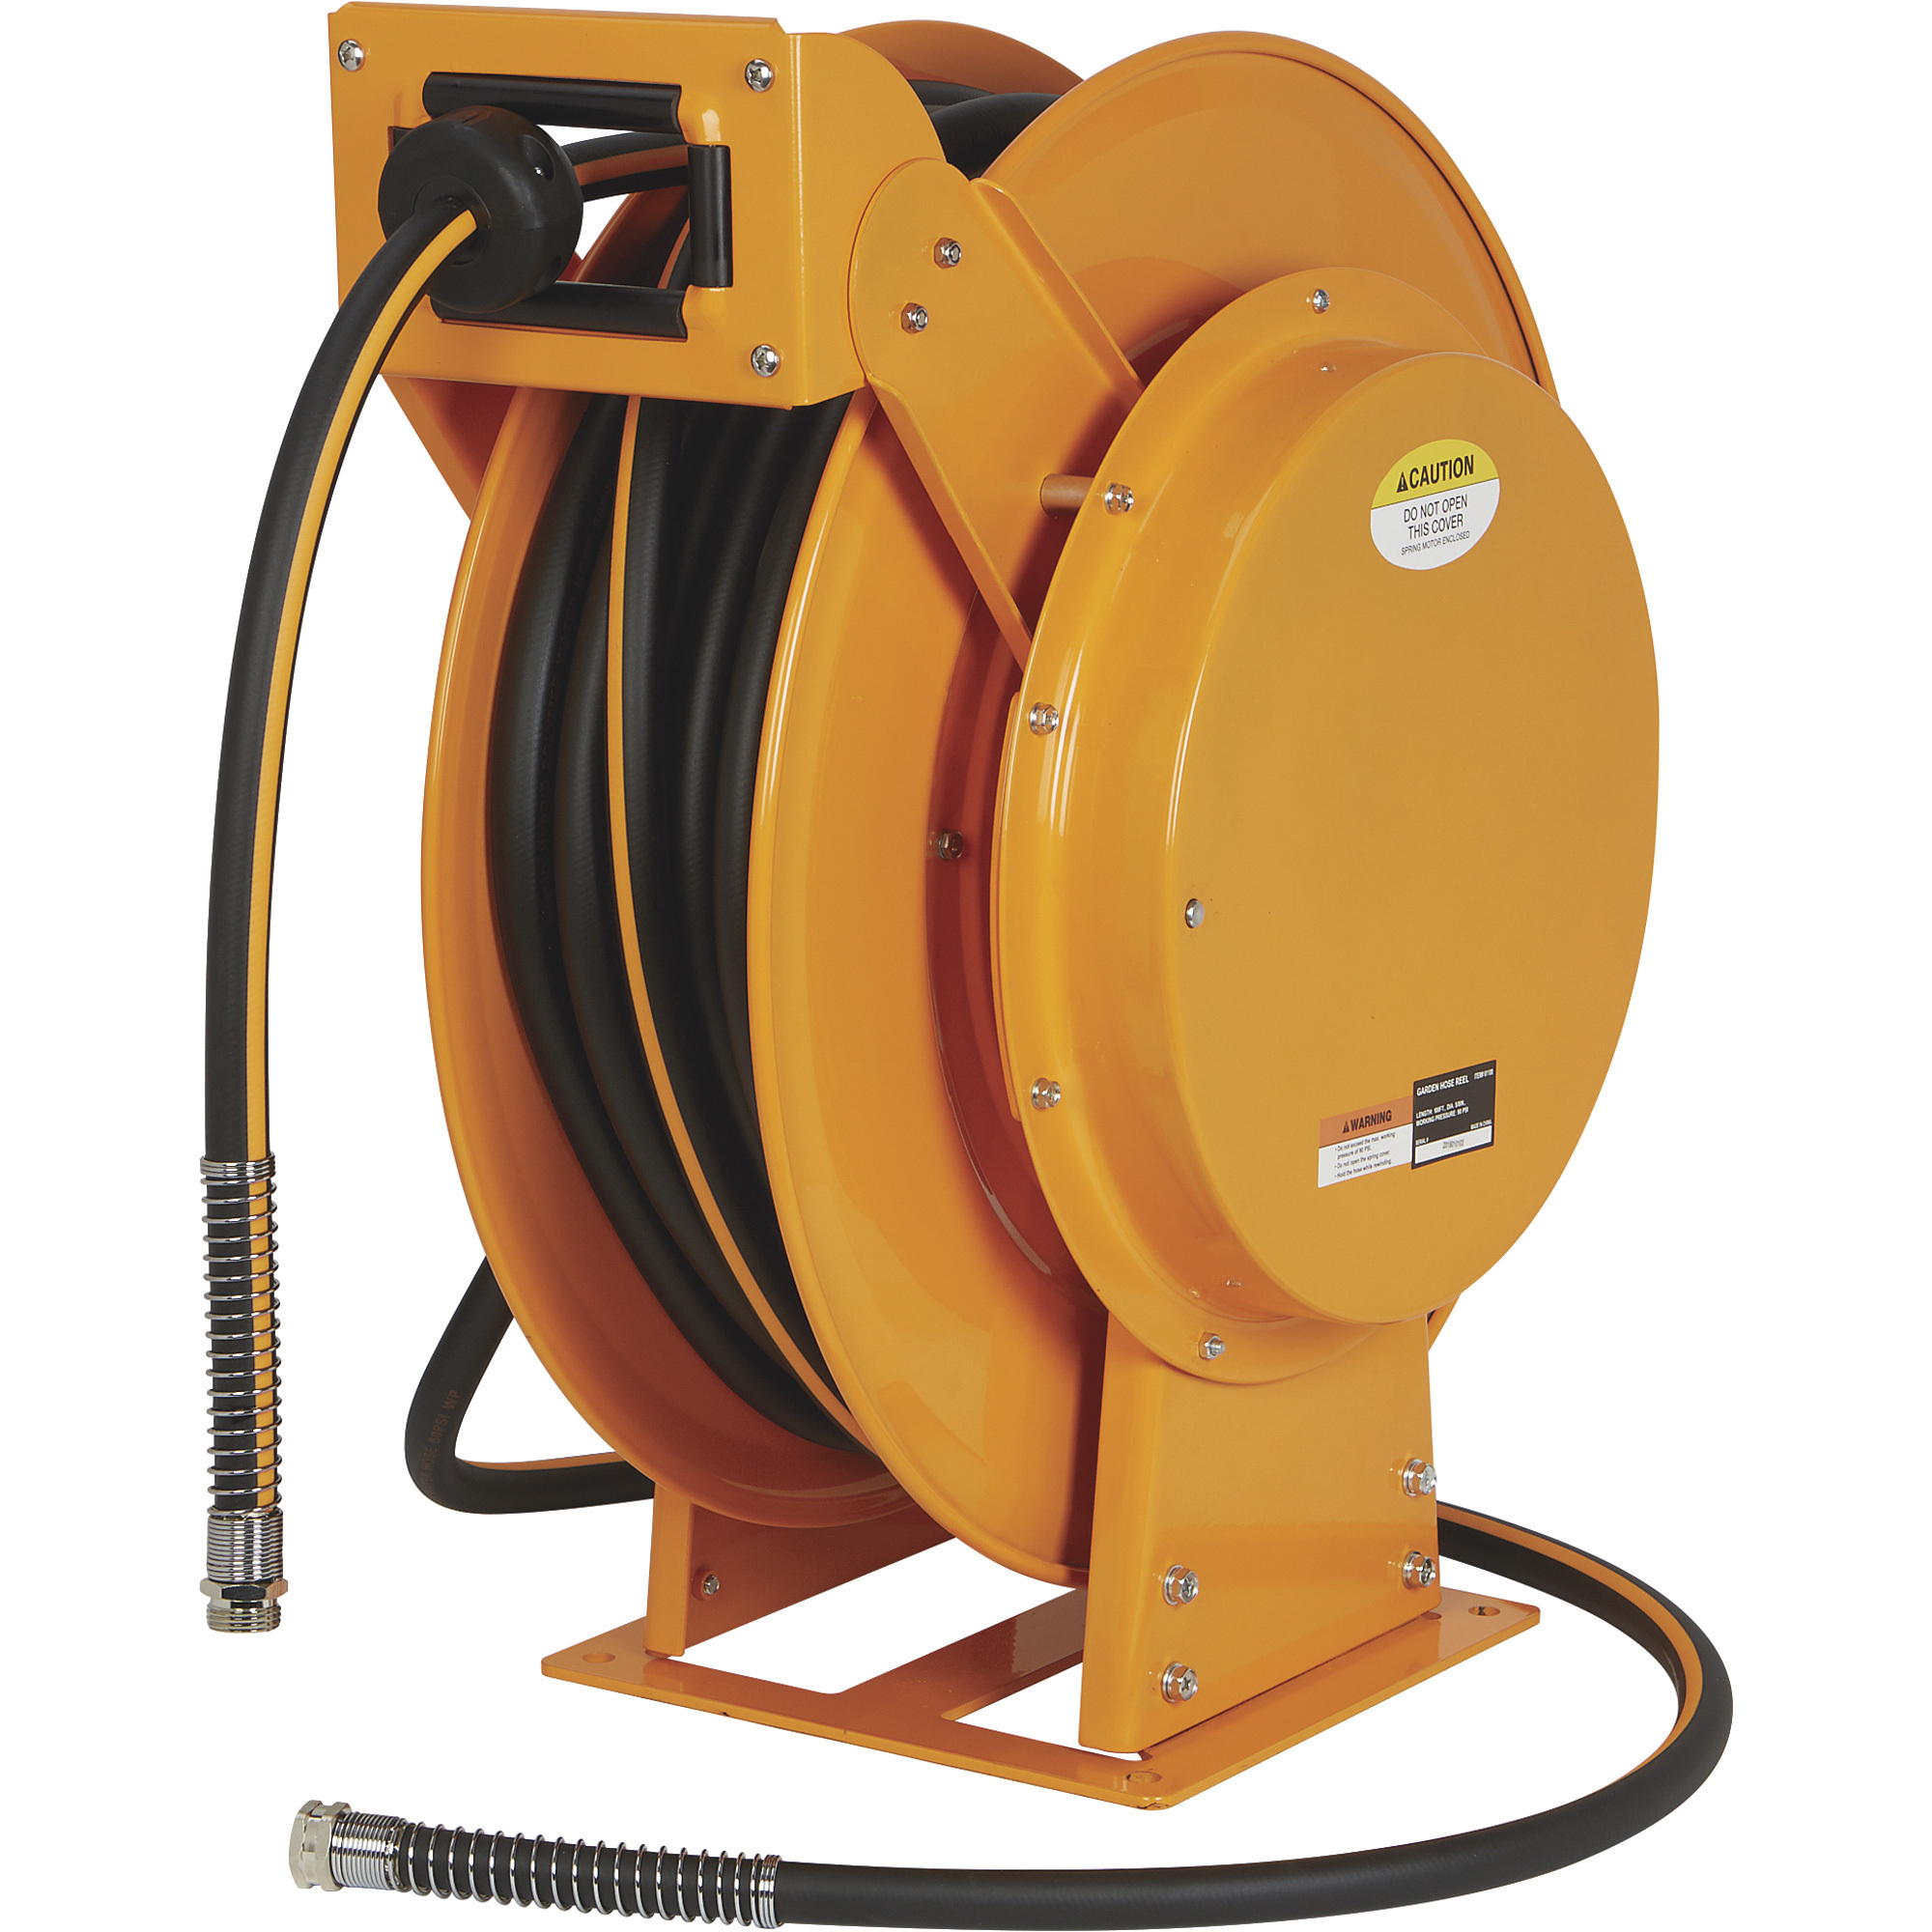 Auto Retractable 100' Air Hose Reel Ceiling Wall Mount &100ft